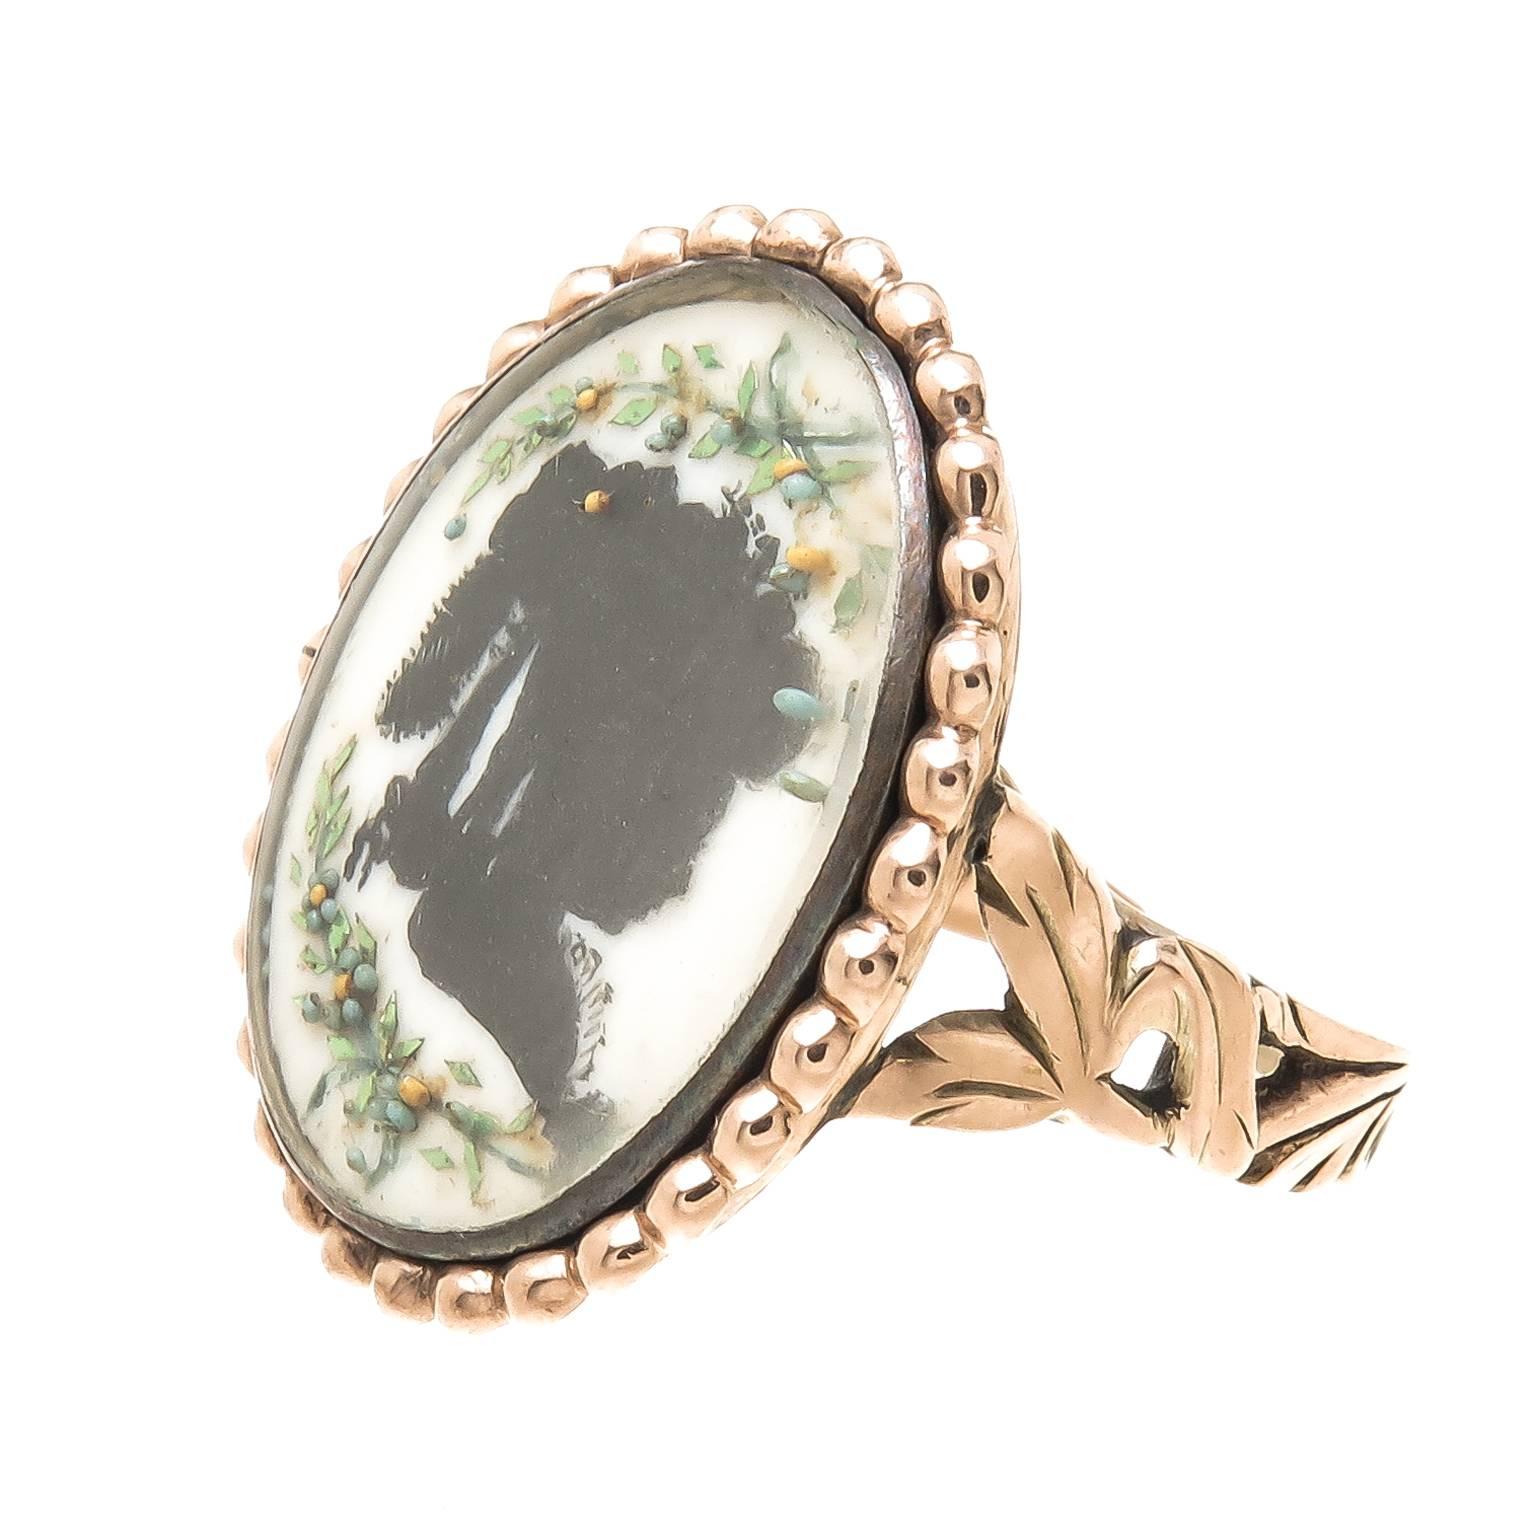 Circa 1850 Yellow Gold Mourning Ring possibly English with a miniature hand painted silhouette of a Young Girl, further decorated with wreaths of colored cut steel and enamel under Glass. The top measures 7/8 X 1/2 inch. Finger size = 7.